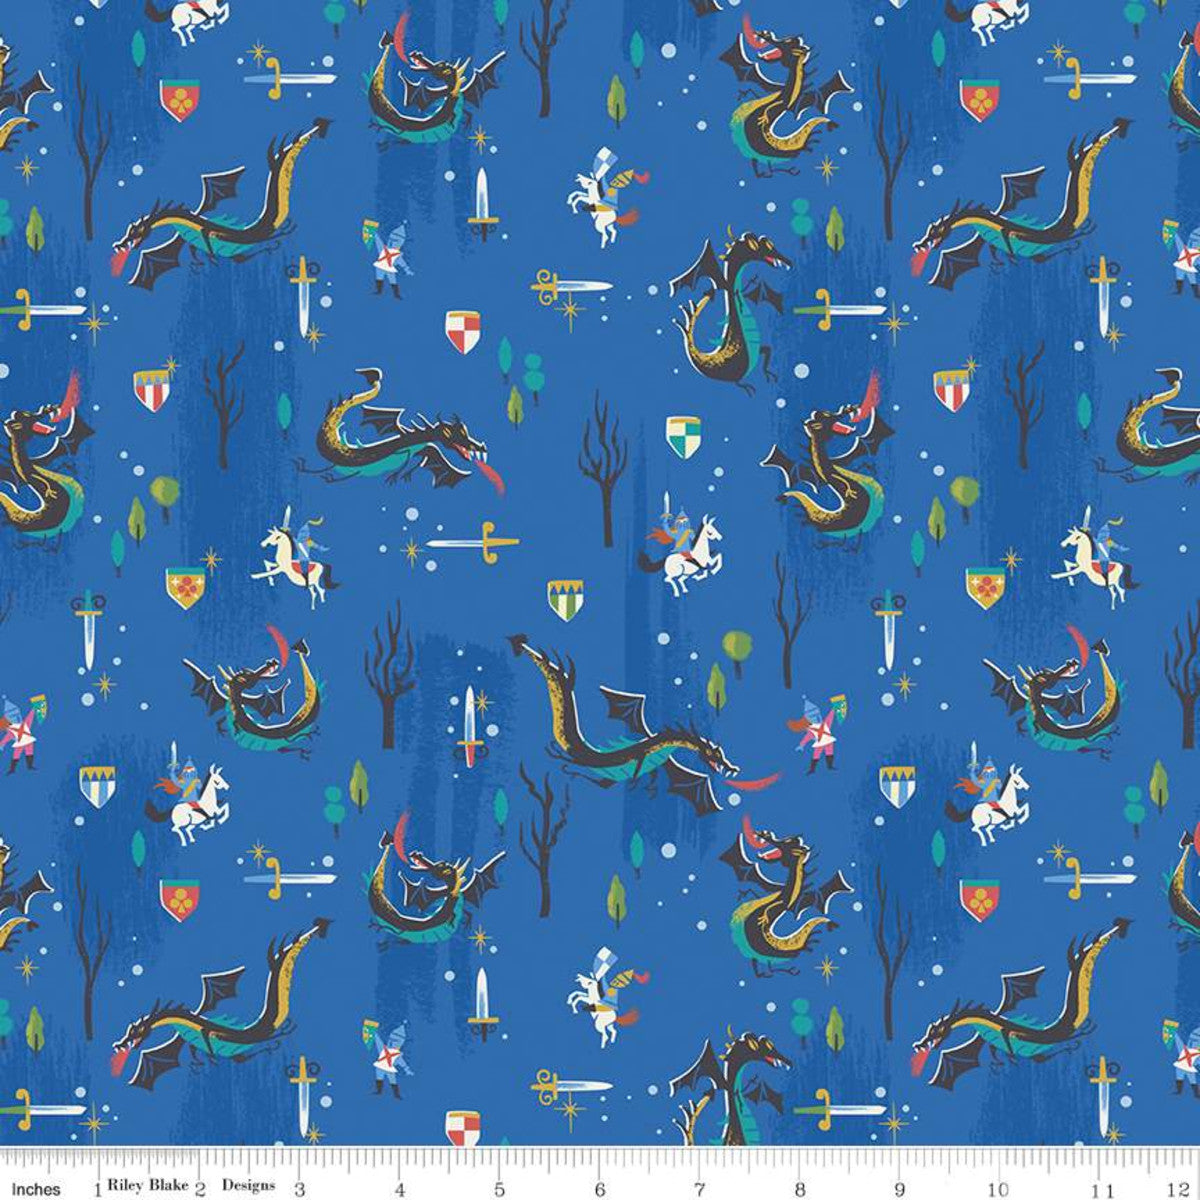 Manufacturer: Riley Blake Designs Designer: Jill Howarth Collection: Little Brier Rose Print Name: Dragons in Midnight Sparkle Material: 100% Cotton  Weight: Quilting  SKU: SC11072-MIDNIGHT